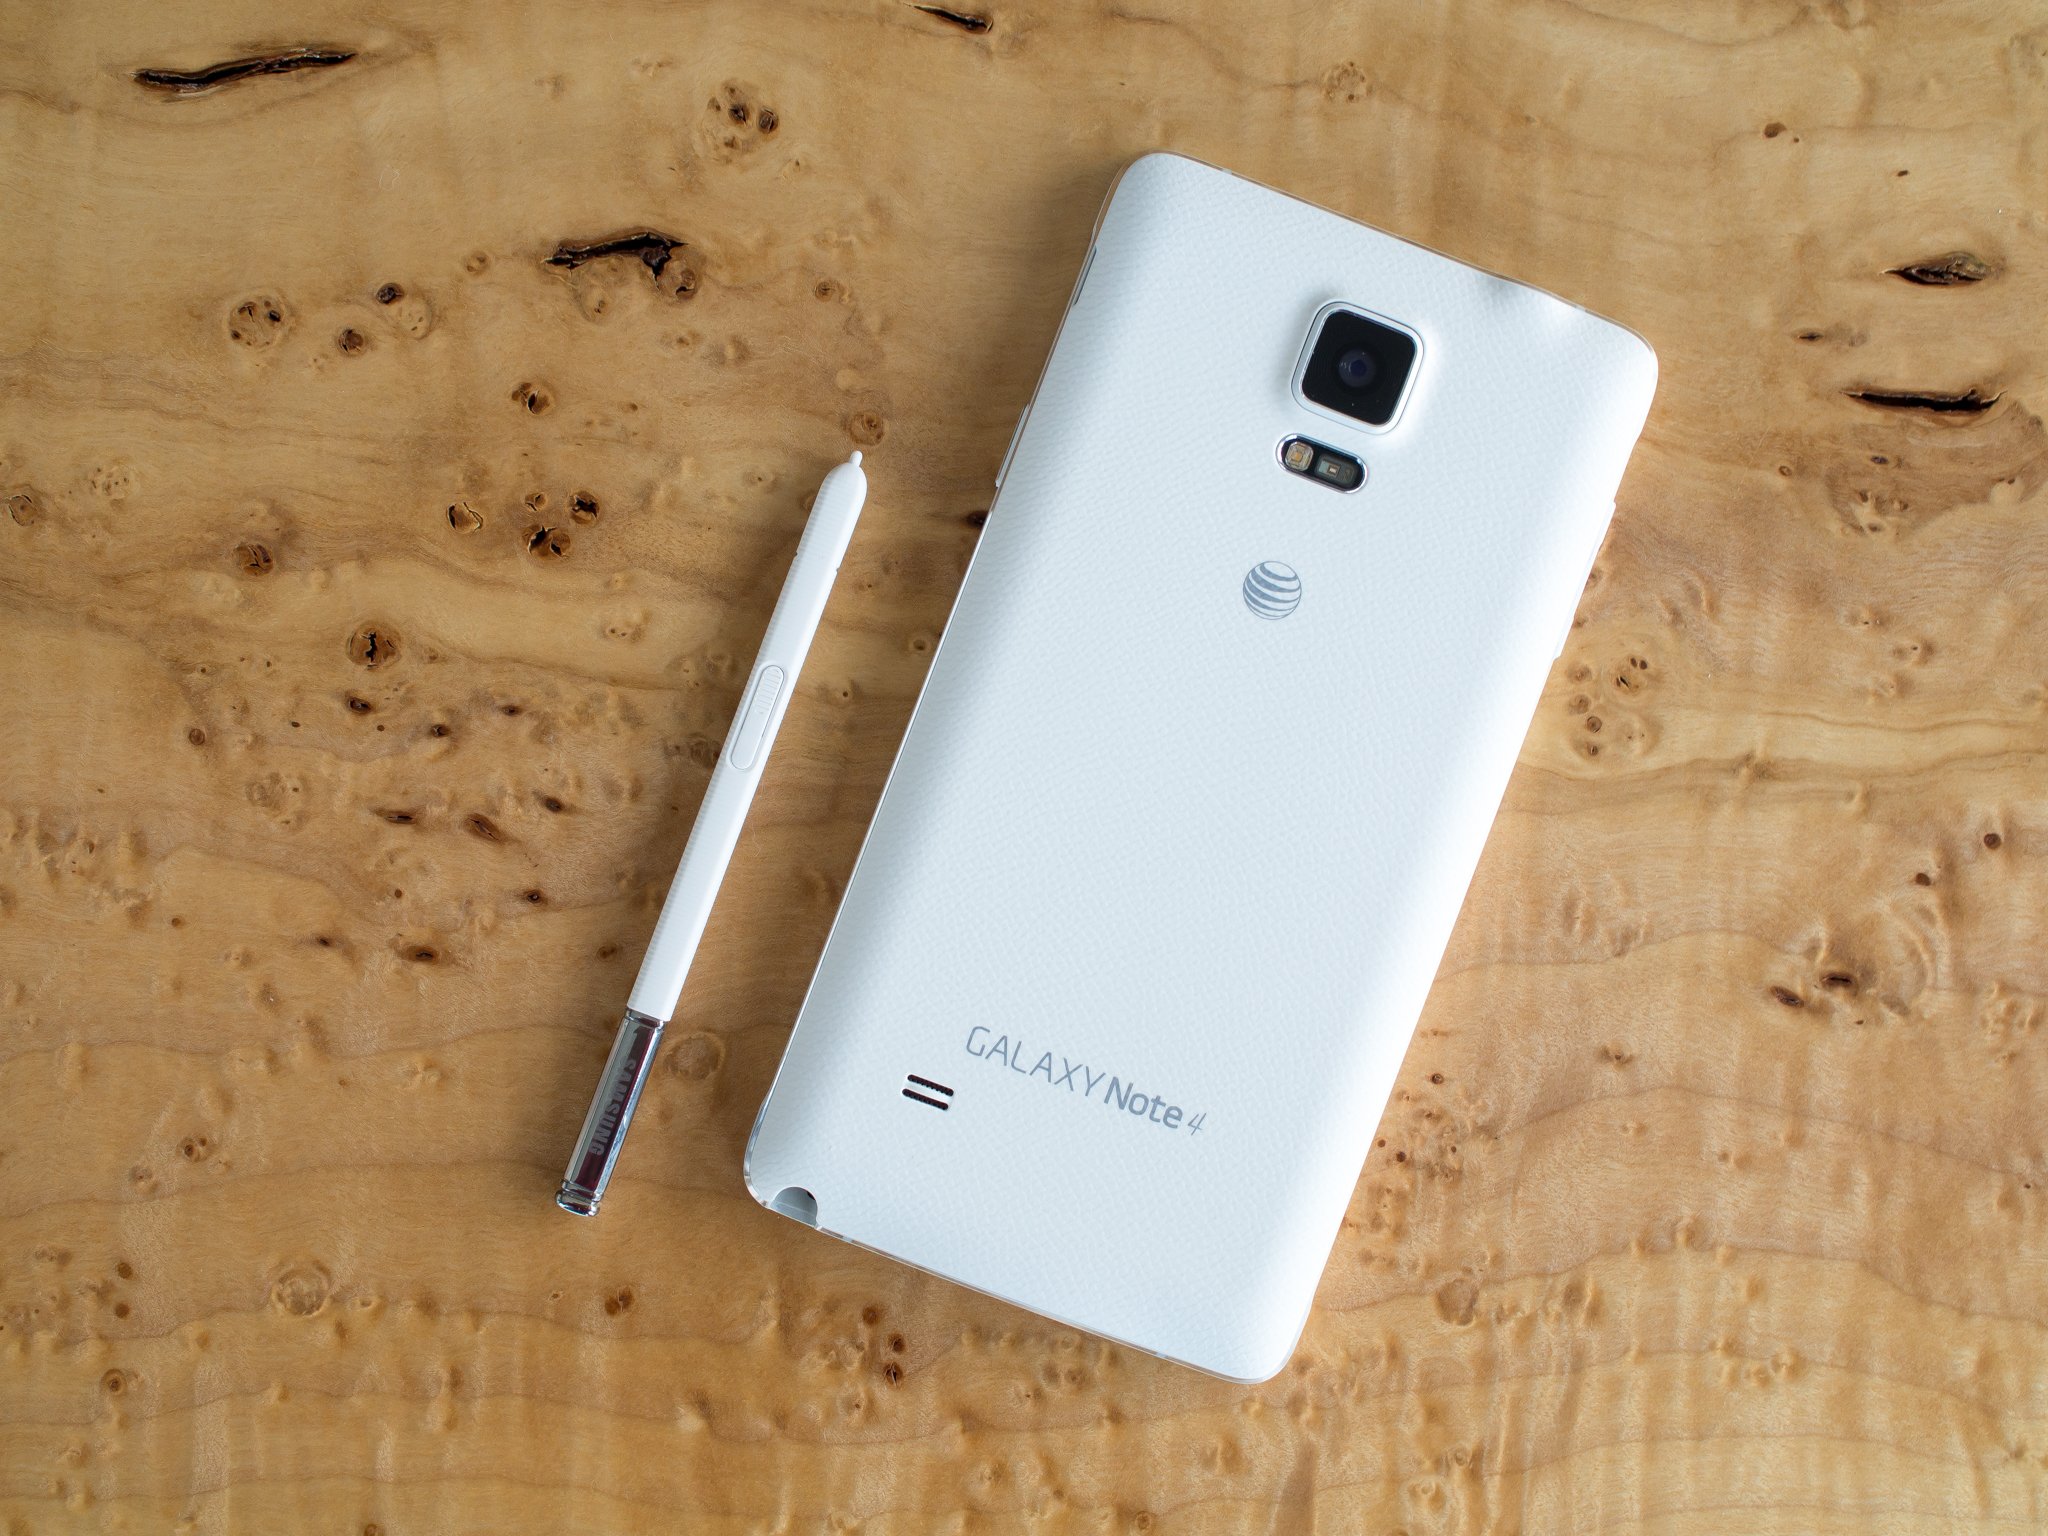 10 Things To Know About The Samsung Galaxy Note 4 Android Central